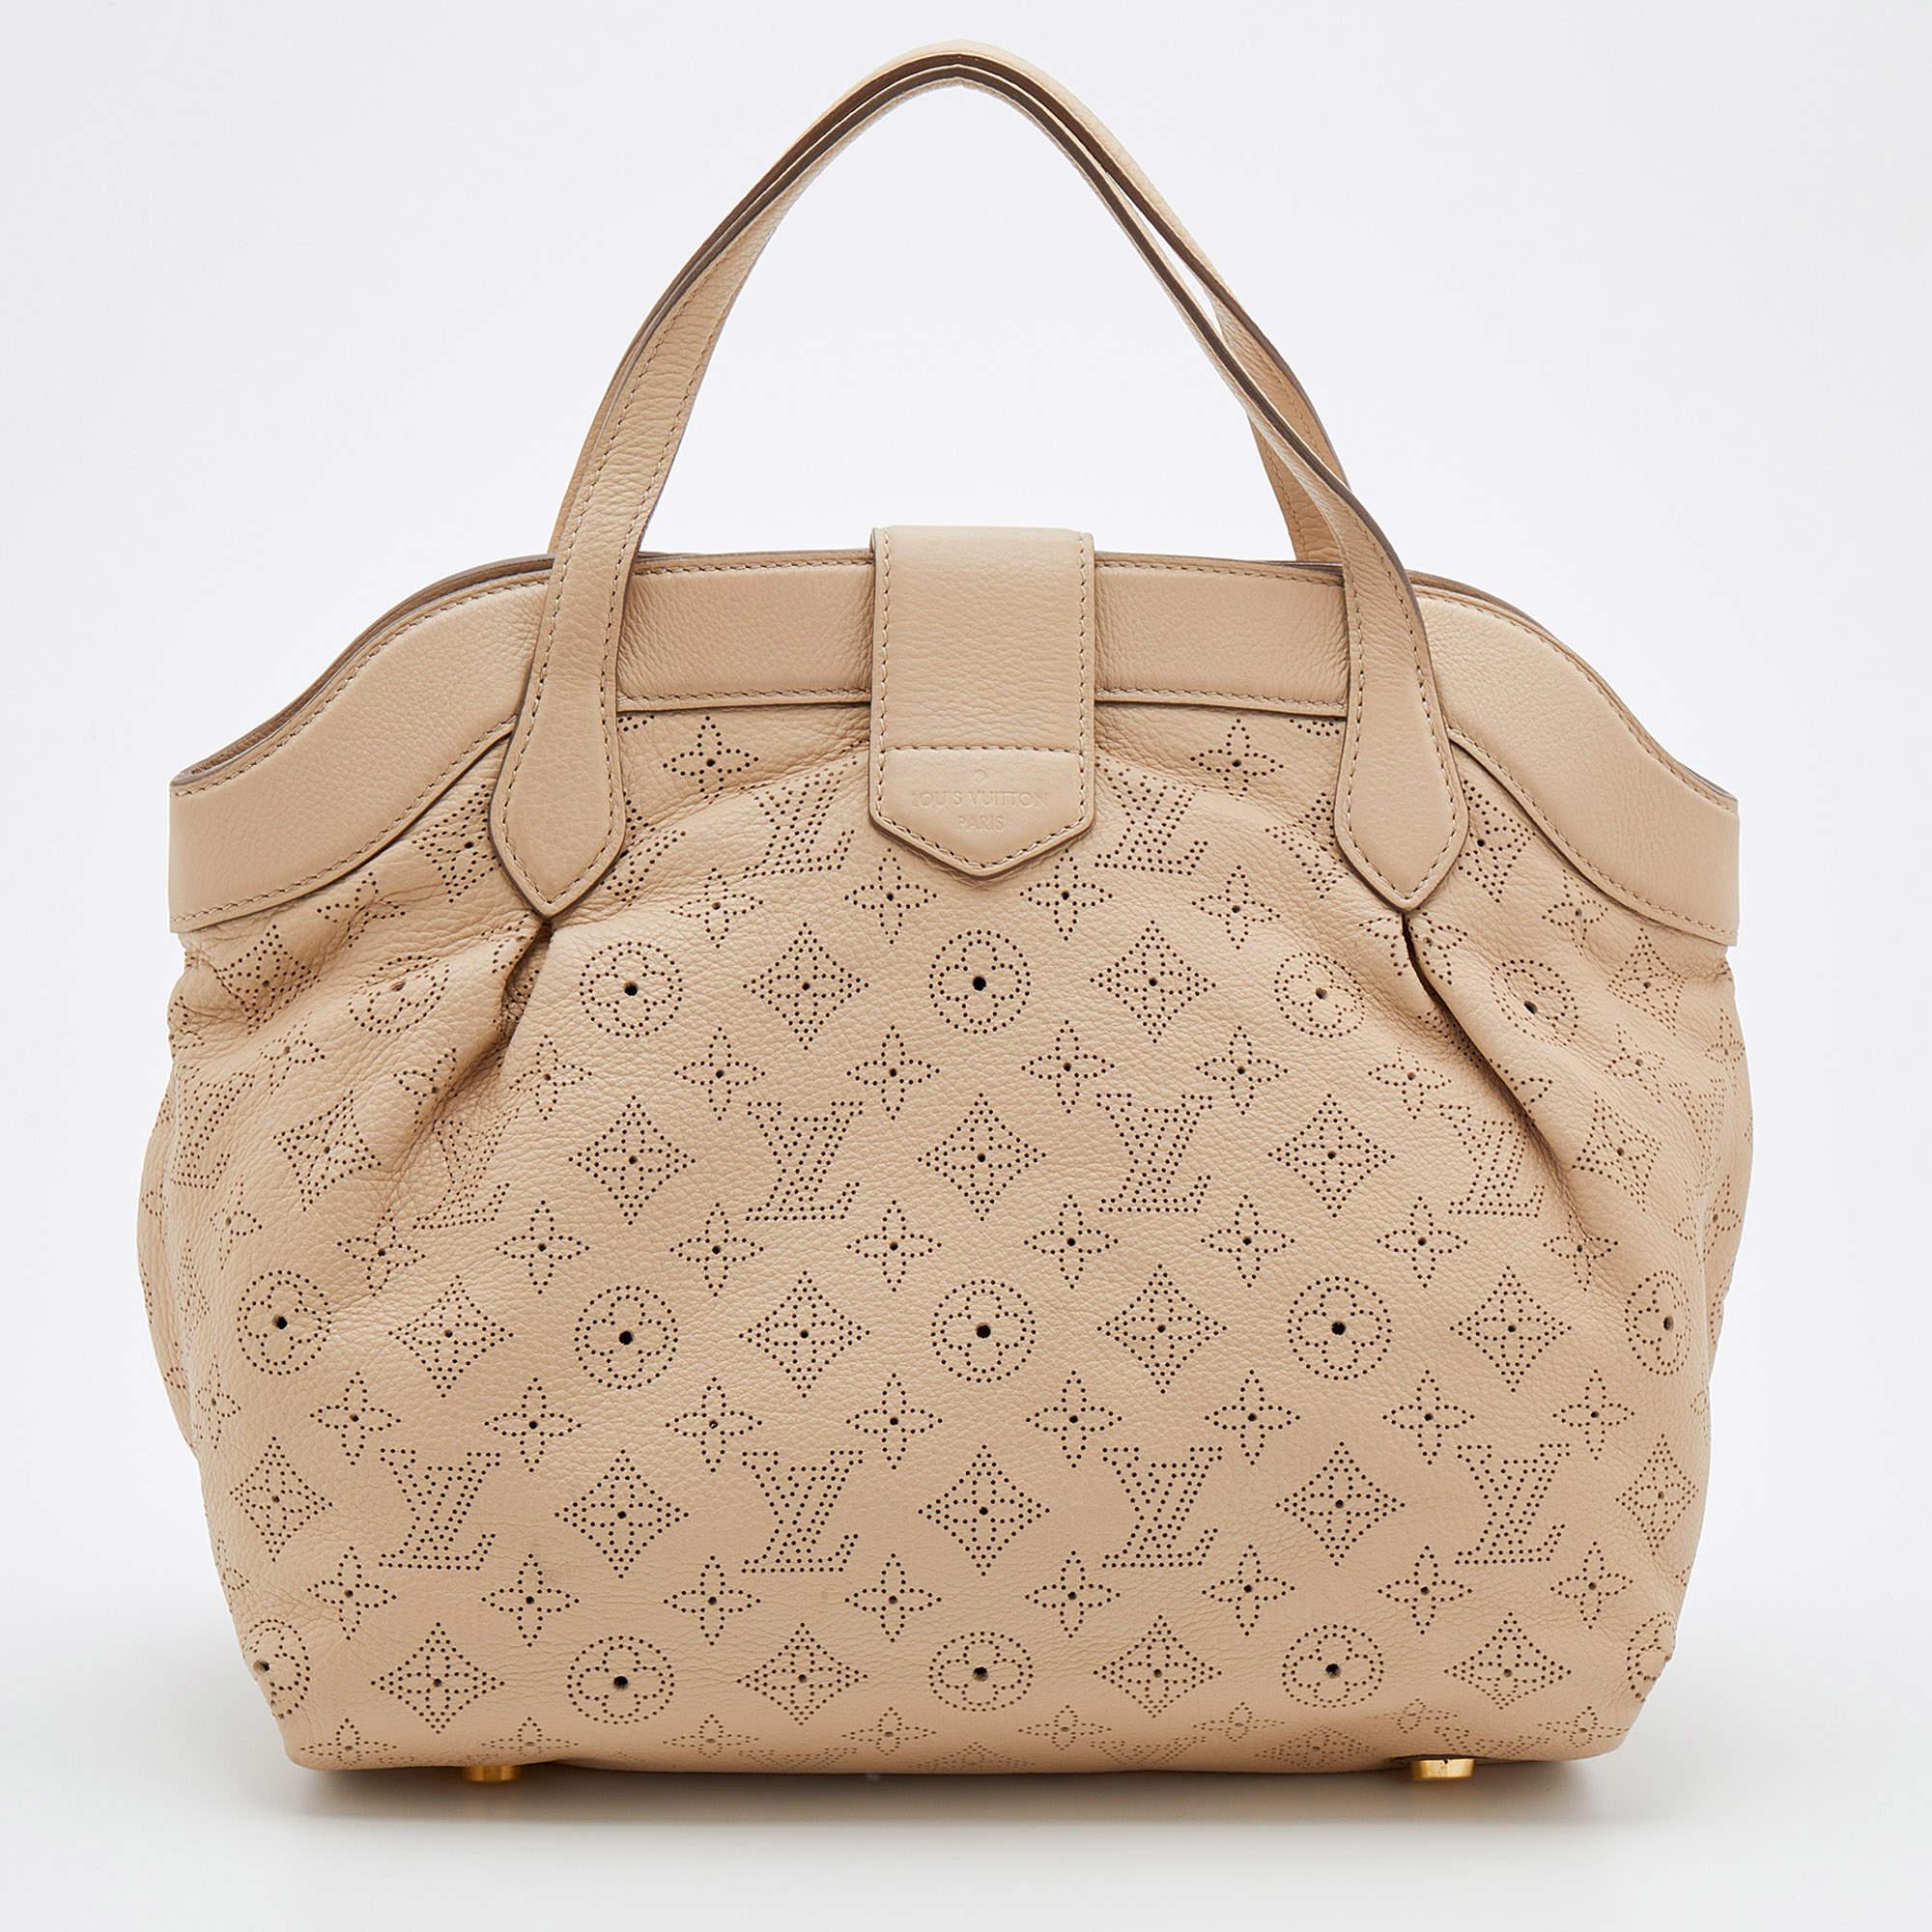 Louis Vuitton handbags are known for their unique designs that emanate the label's elegant flair and the label's immaculate craftsmanship makes their creations last season after season. Here is a stunning bag, meticulously crafted and stitched to